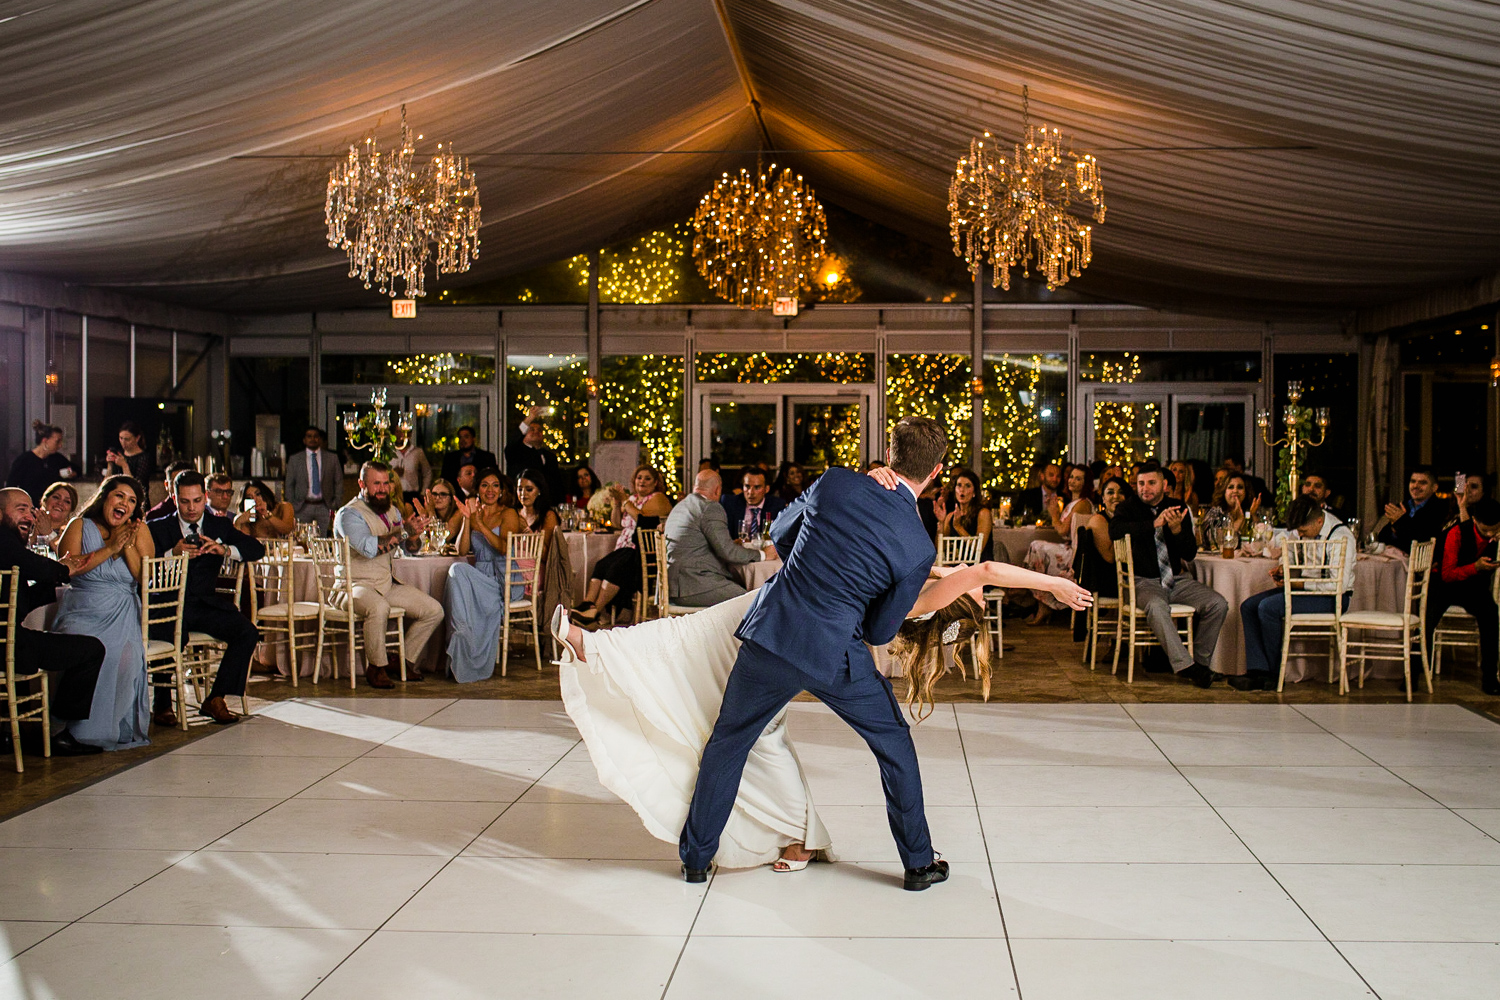 A bride and groom share their first dance during a Gallery Marchetti wedding.